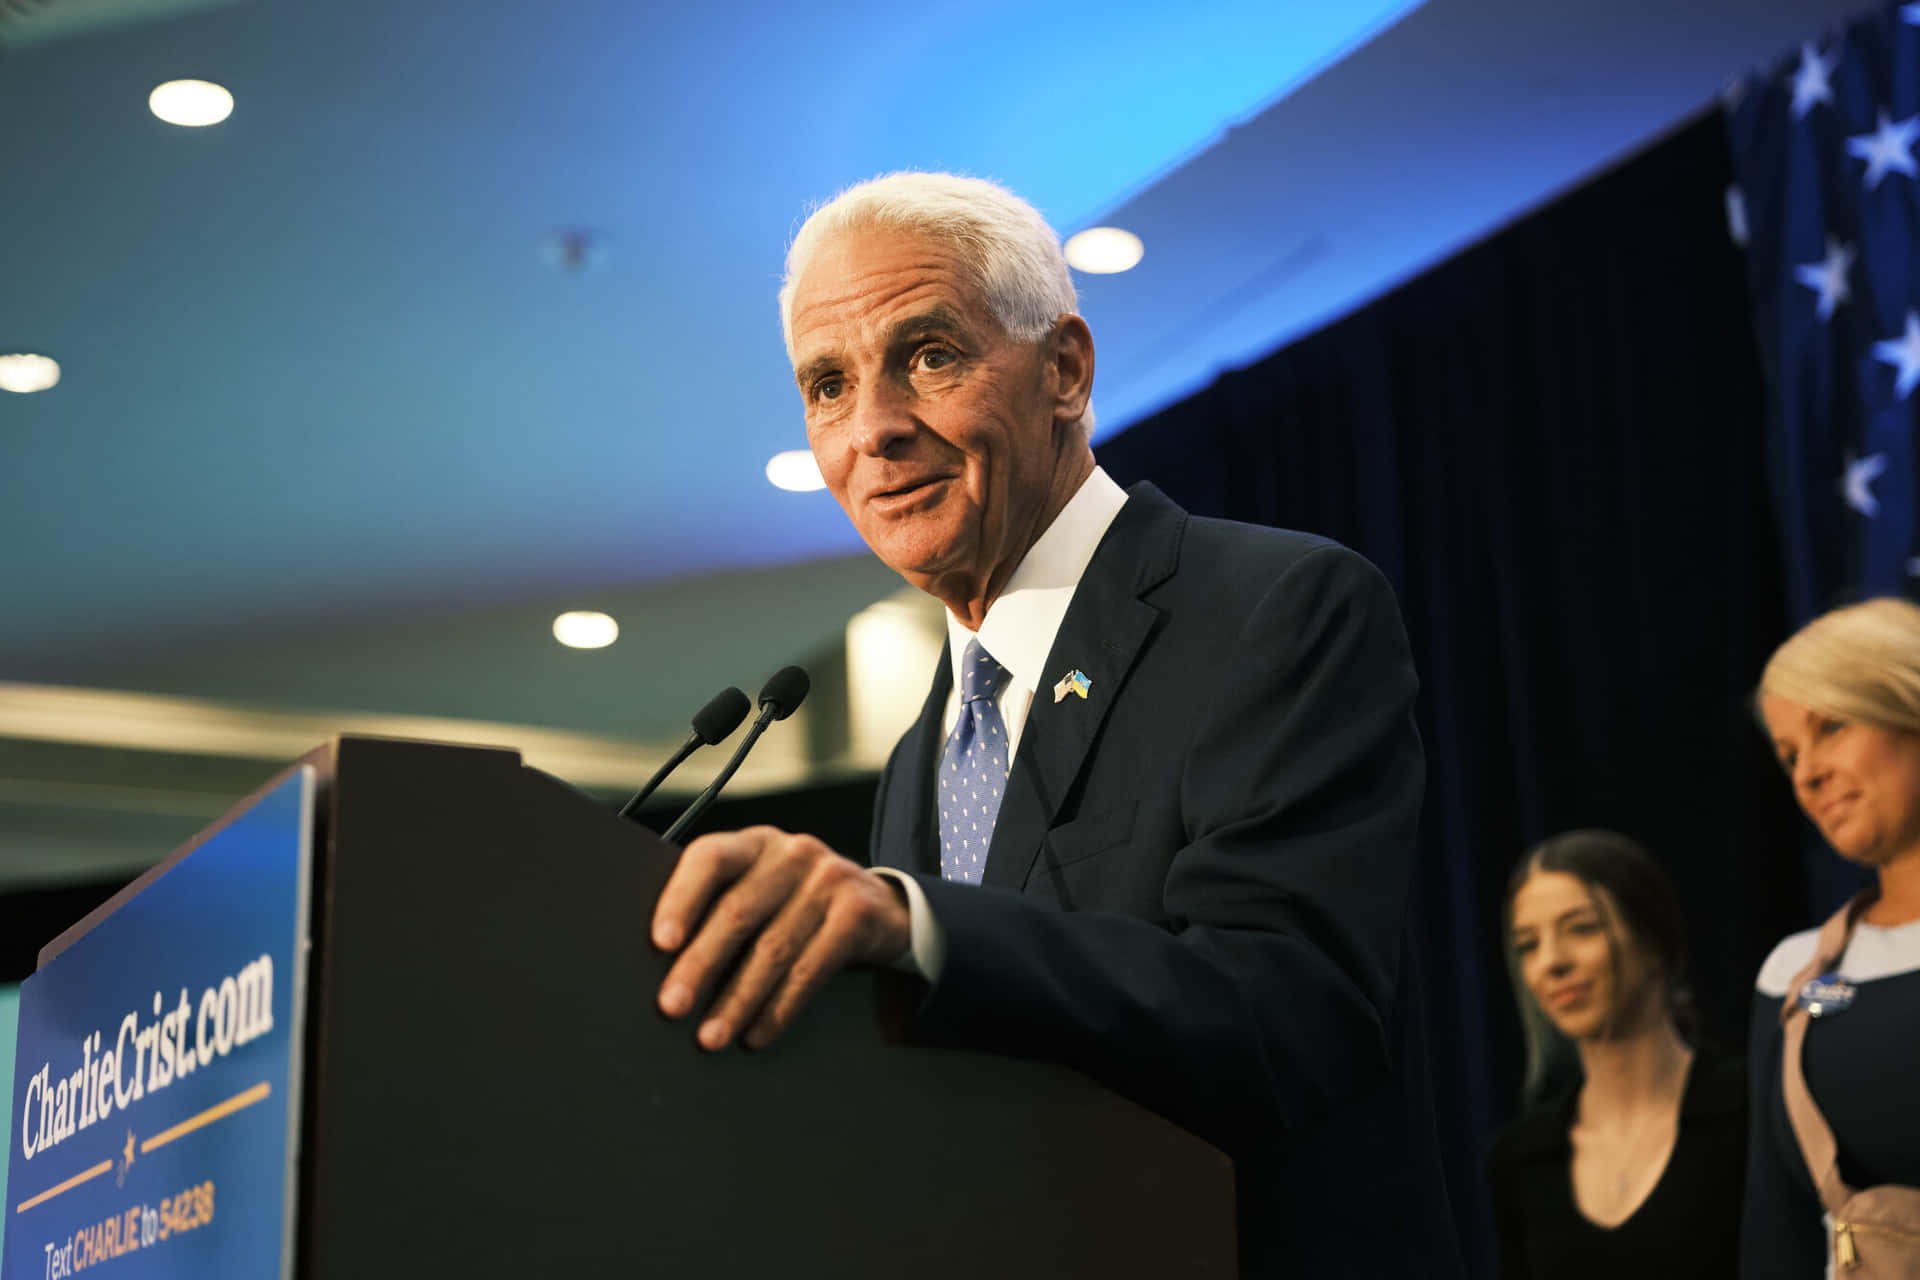 Former Governor Charlie Crist Engaging Audience in Speech Wallpaper